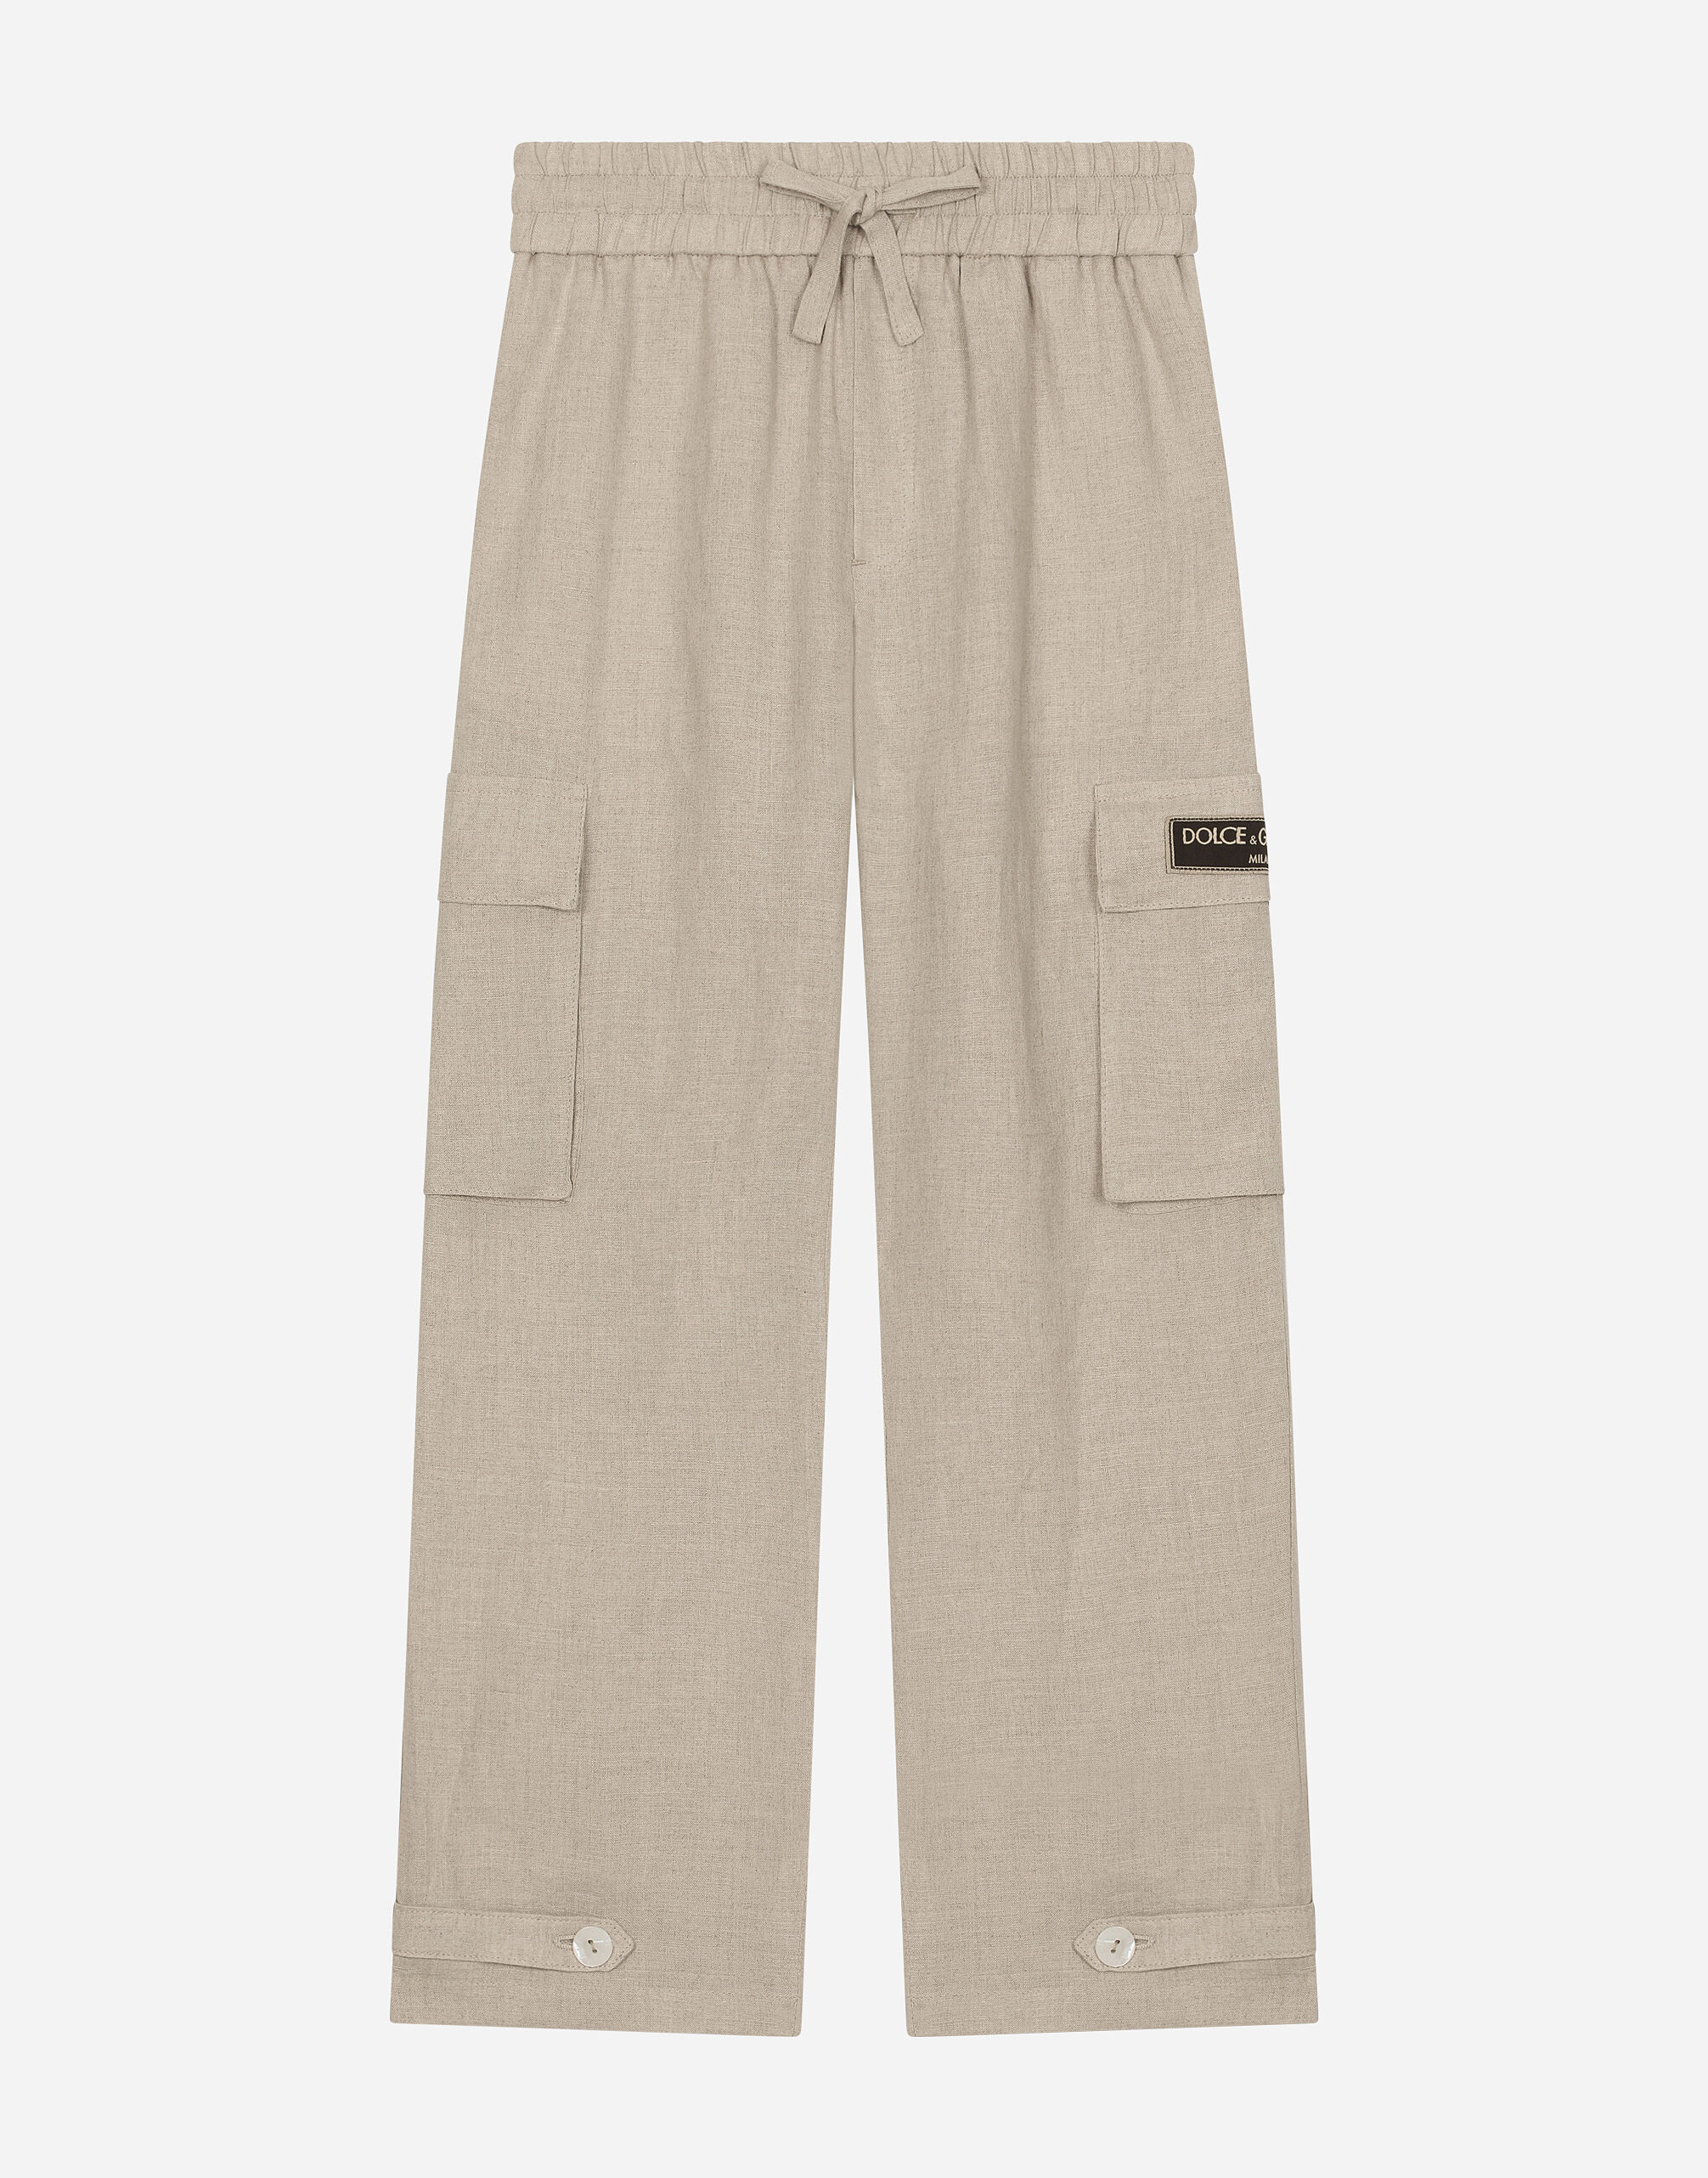 Dolce & Gabbana Linen cargo pants with branded label Beige L44S02G7NWR